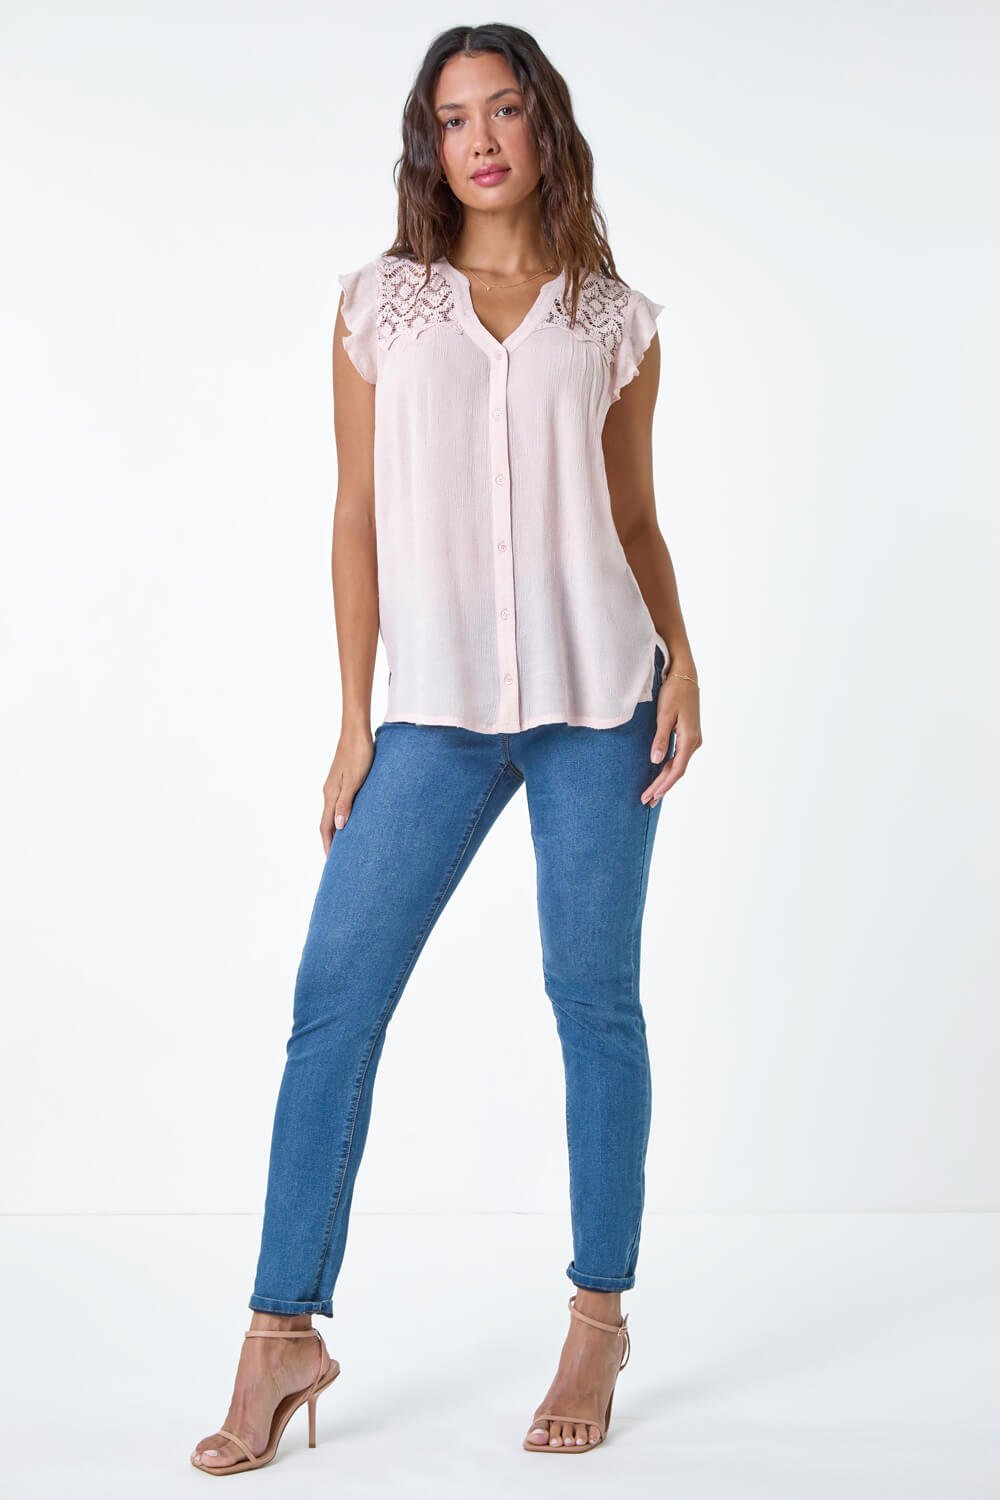 Light Pink Sleeveless Lace Detail Blouse, Image 2 of 5